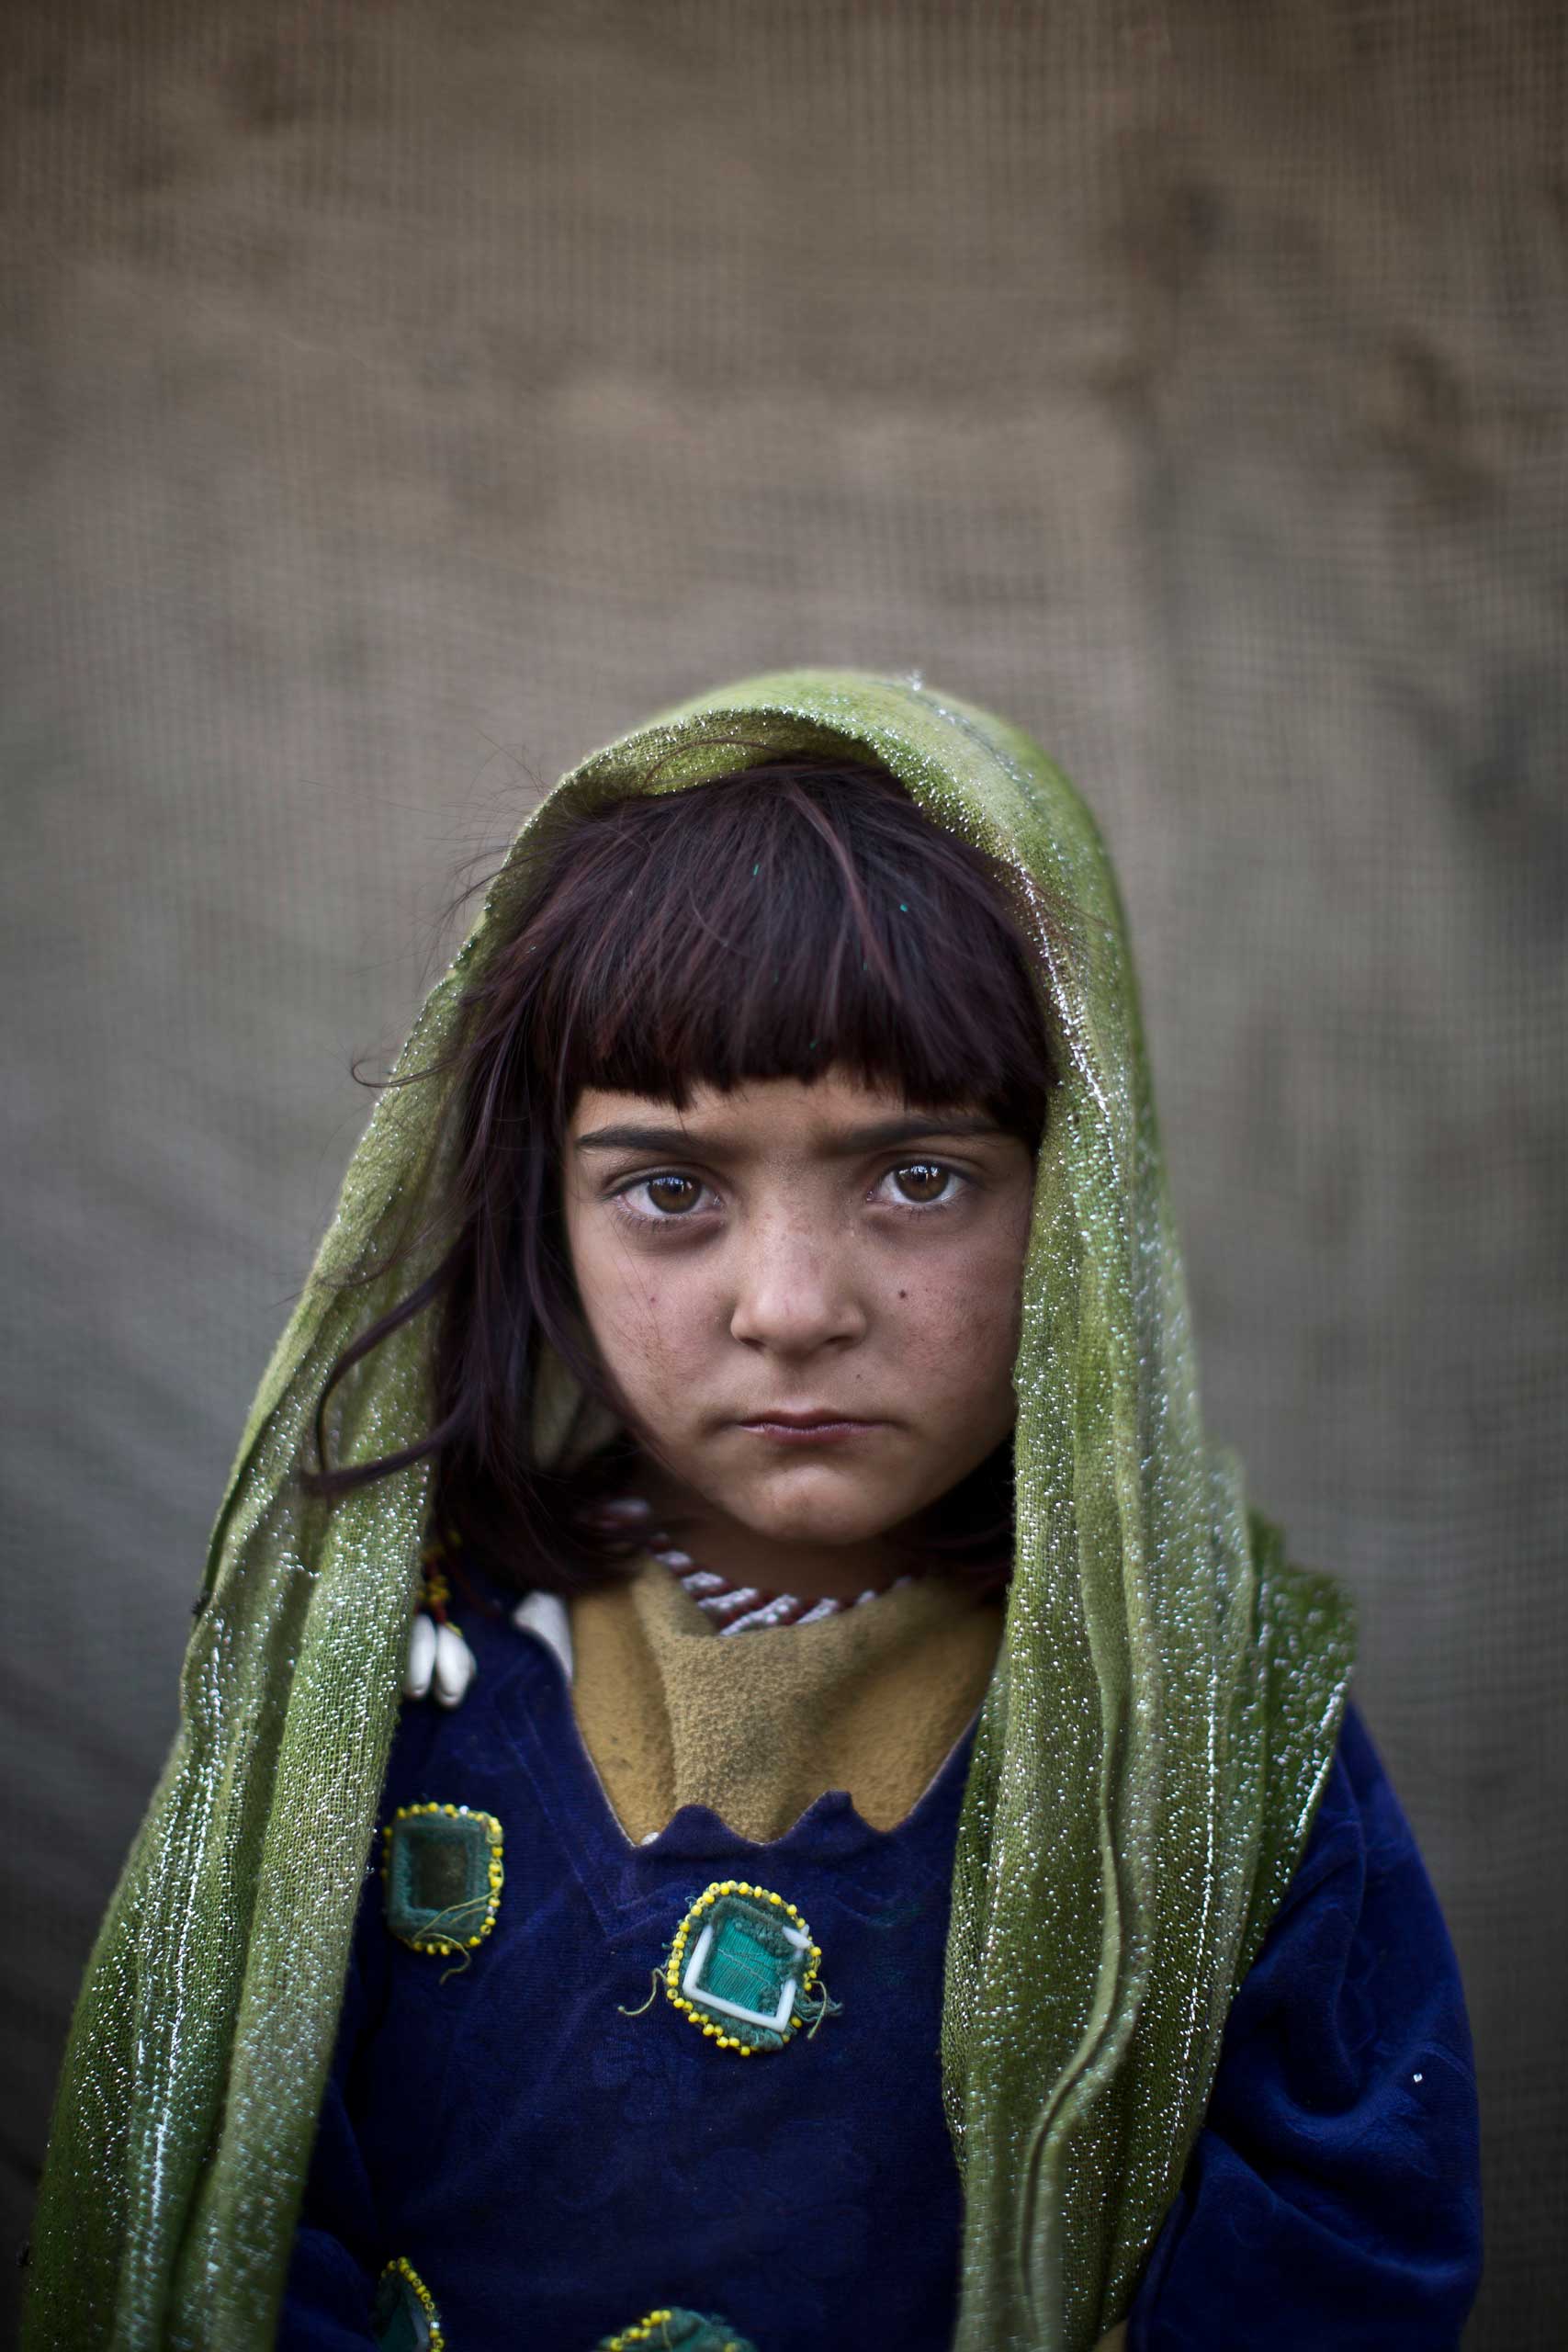 Afghan refugee girl, Zarlakhta Nawab, 6, poses for a picture, while playing with other children in a slum on the outskirts of Islamabad, Pakistan. Jan. 25, 2014.